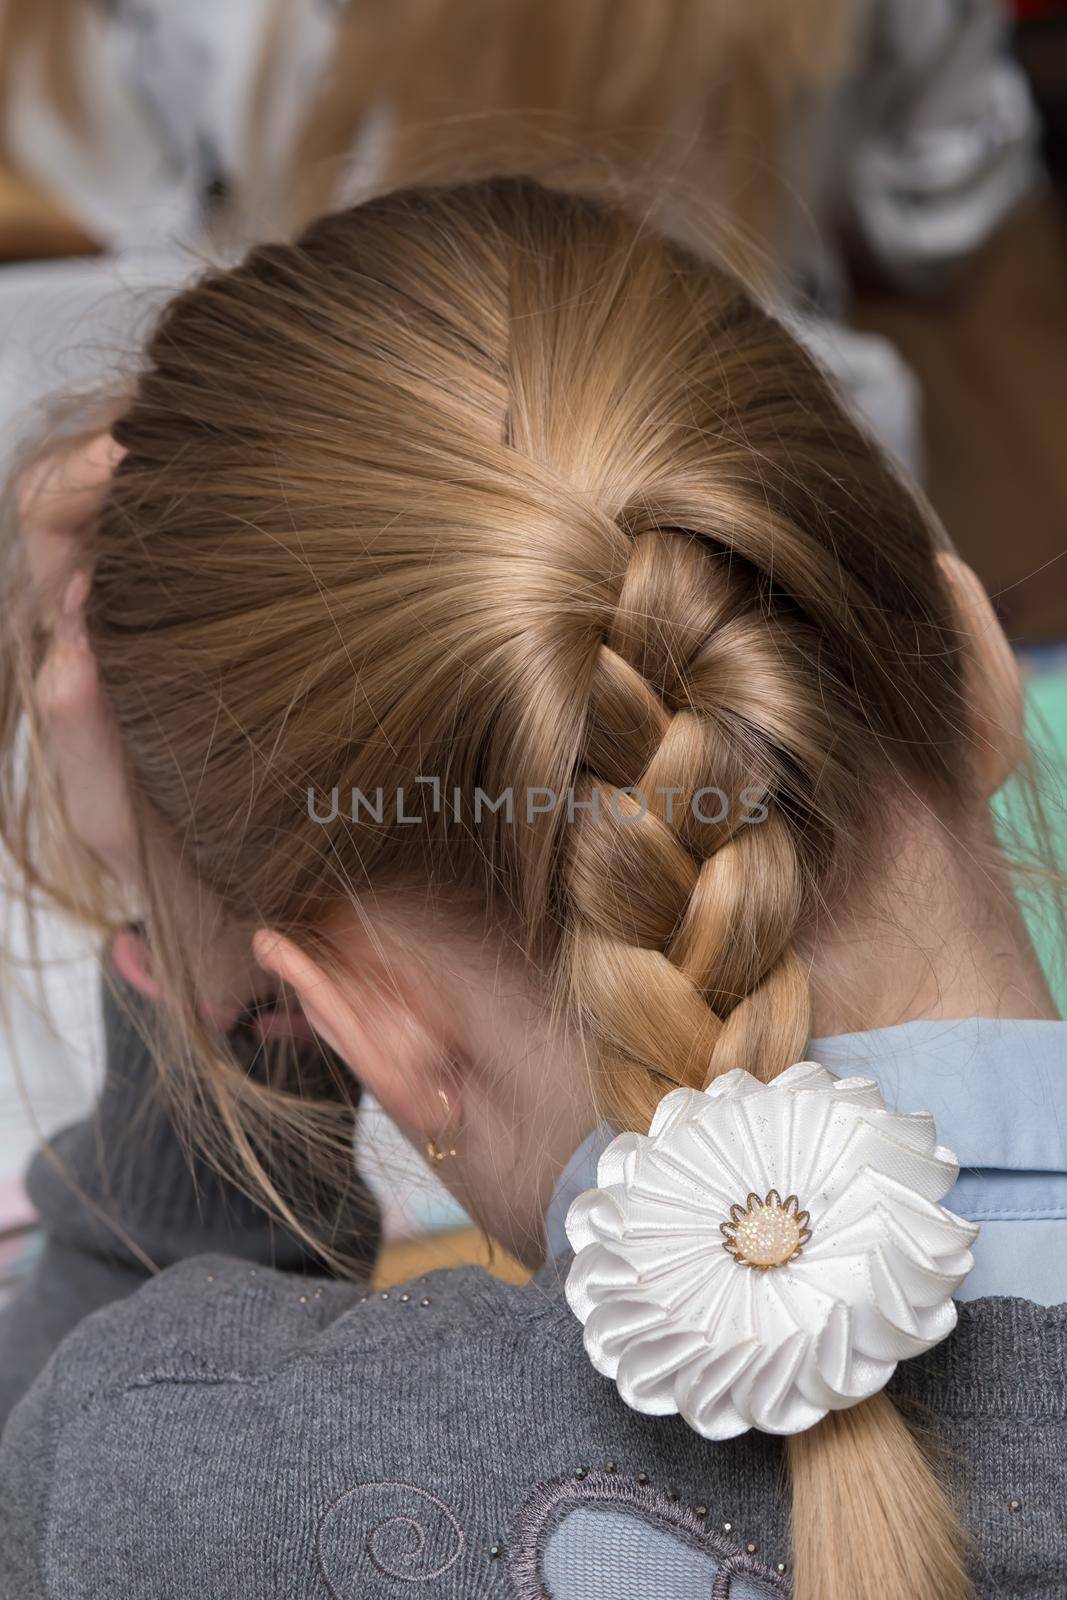 A short pigtail on the back of the girl's head with a bow. The girl rests her head on her hand, she thinks. The student is doing her homework.